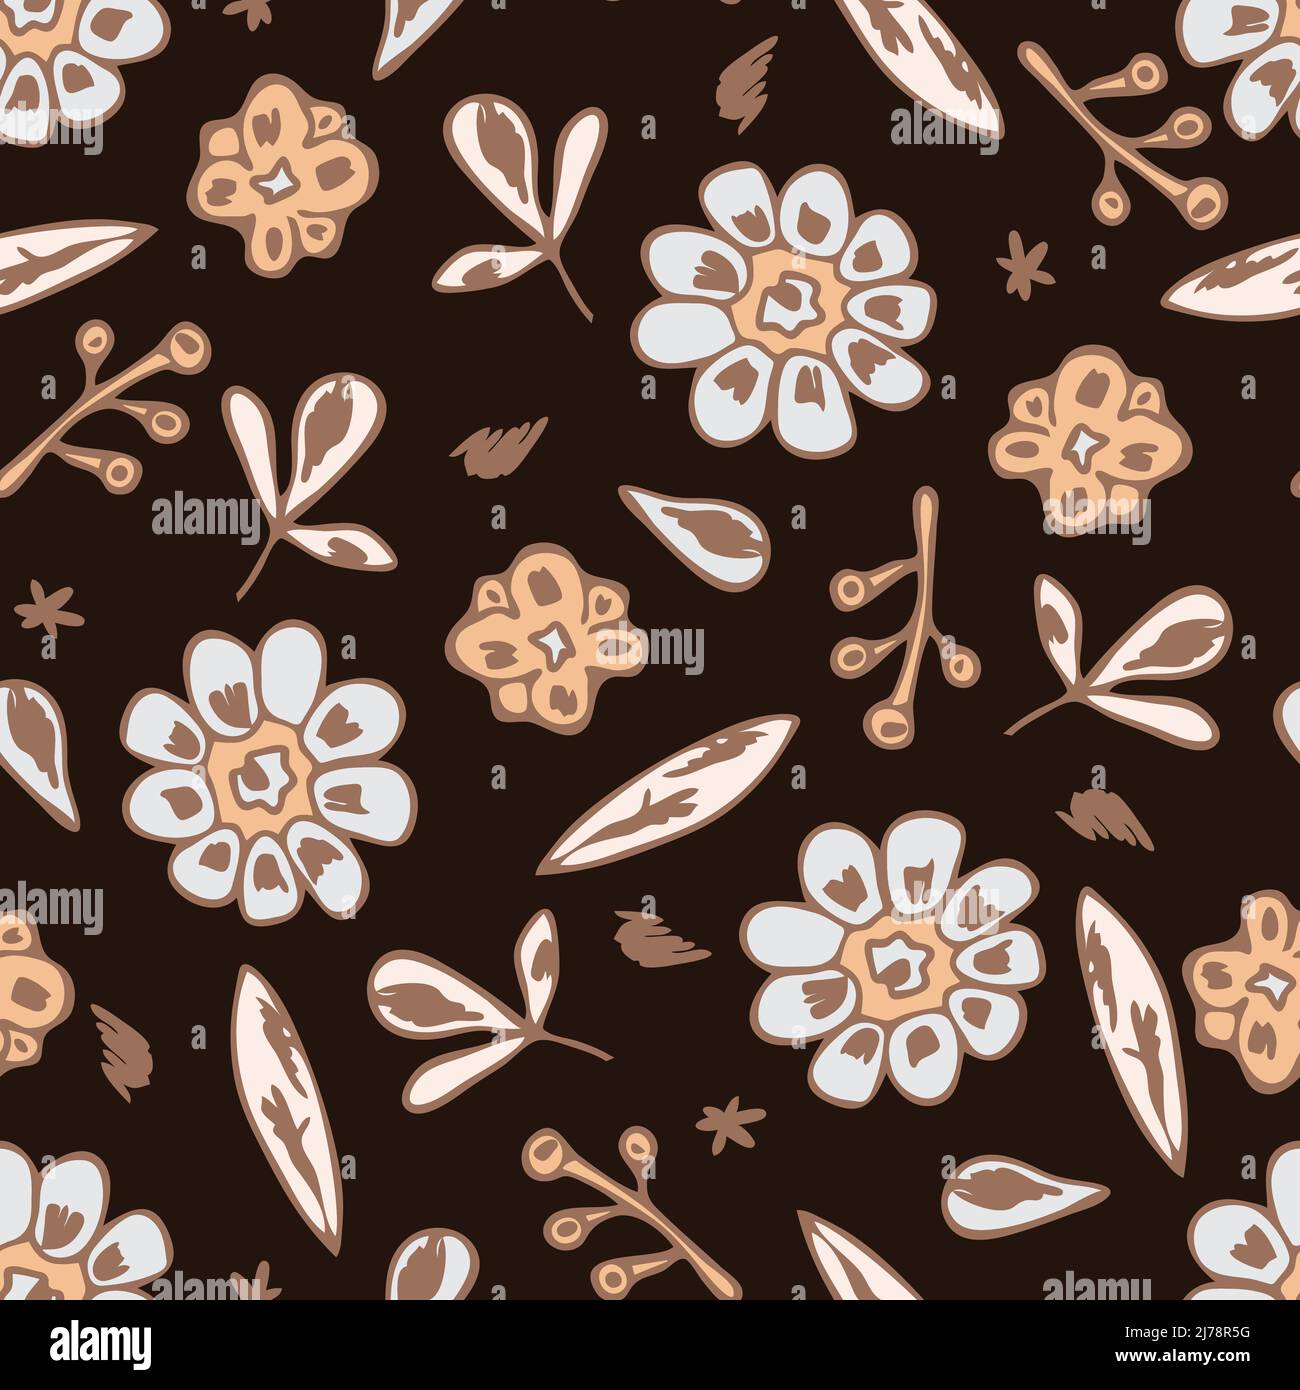 Seamless vector pattern with vintage floral bloom on black background. Hand drawn flower sketch wallpaper design. Decorative romantic fashion textile. Stock Vector